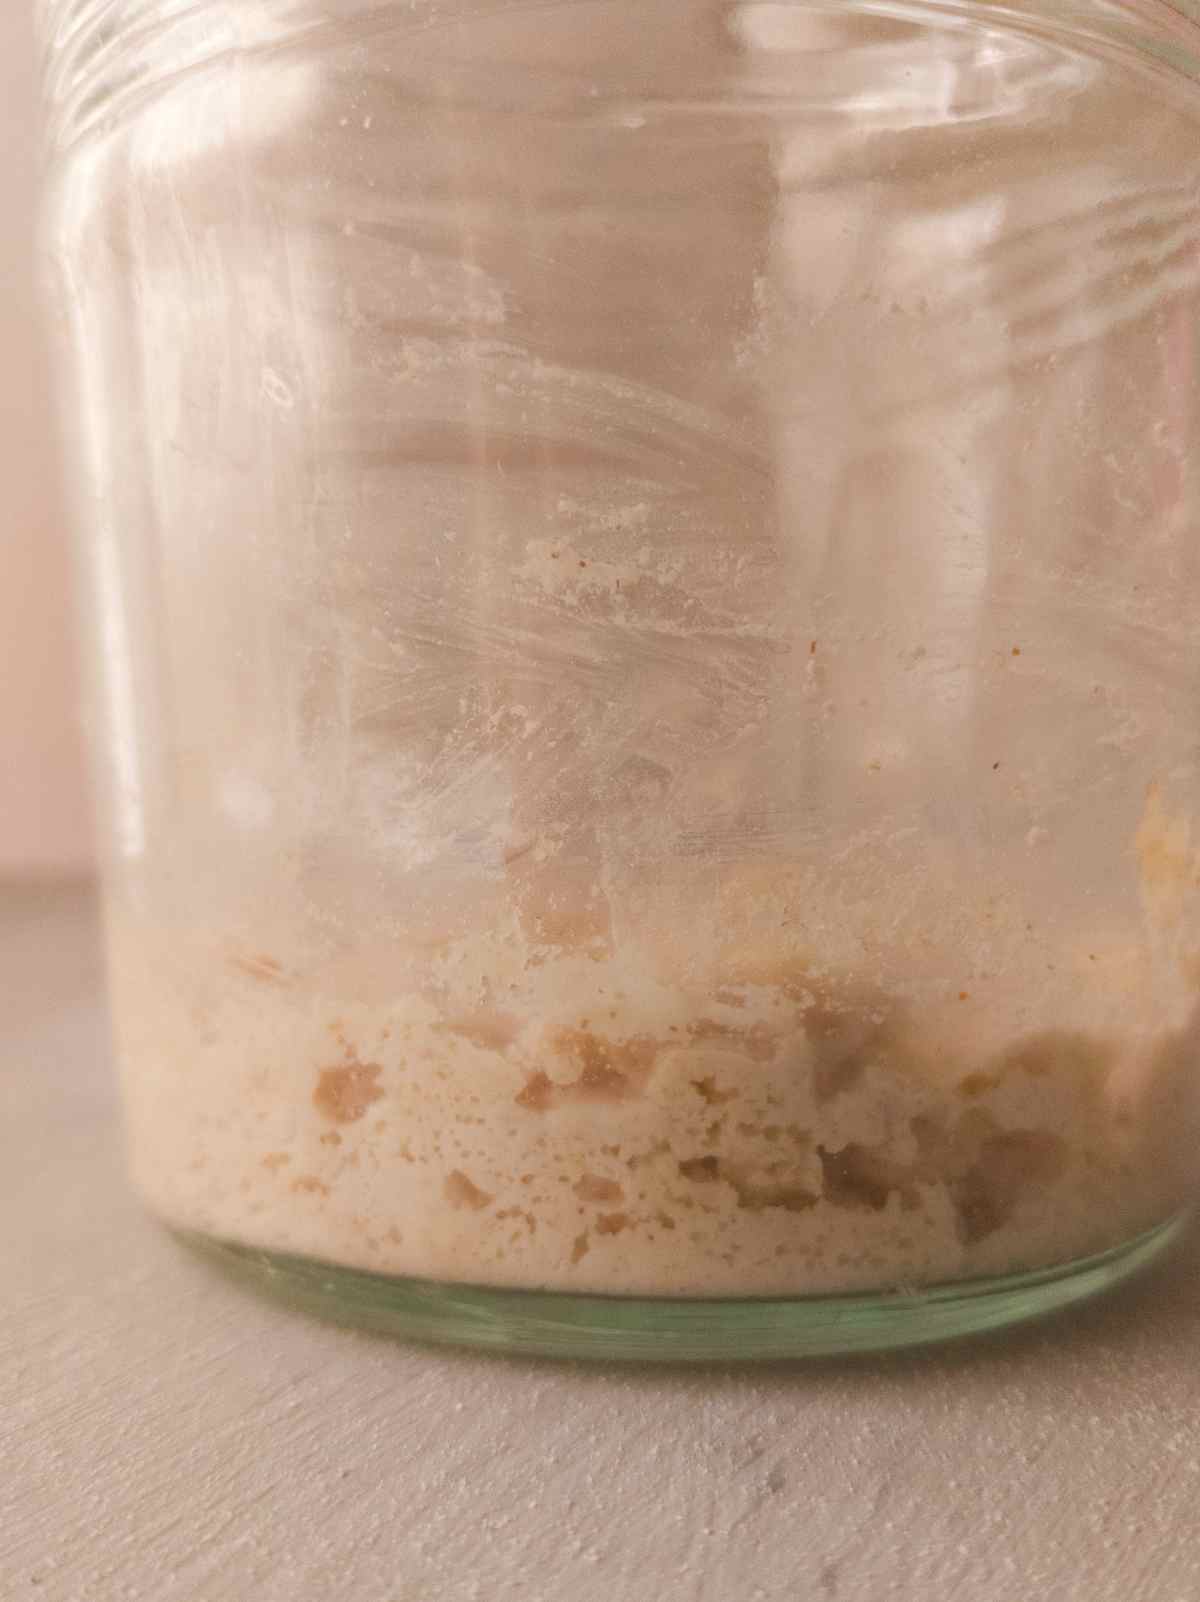 Brown rice starter showing bubbles and activity.